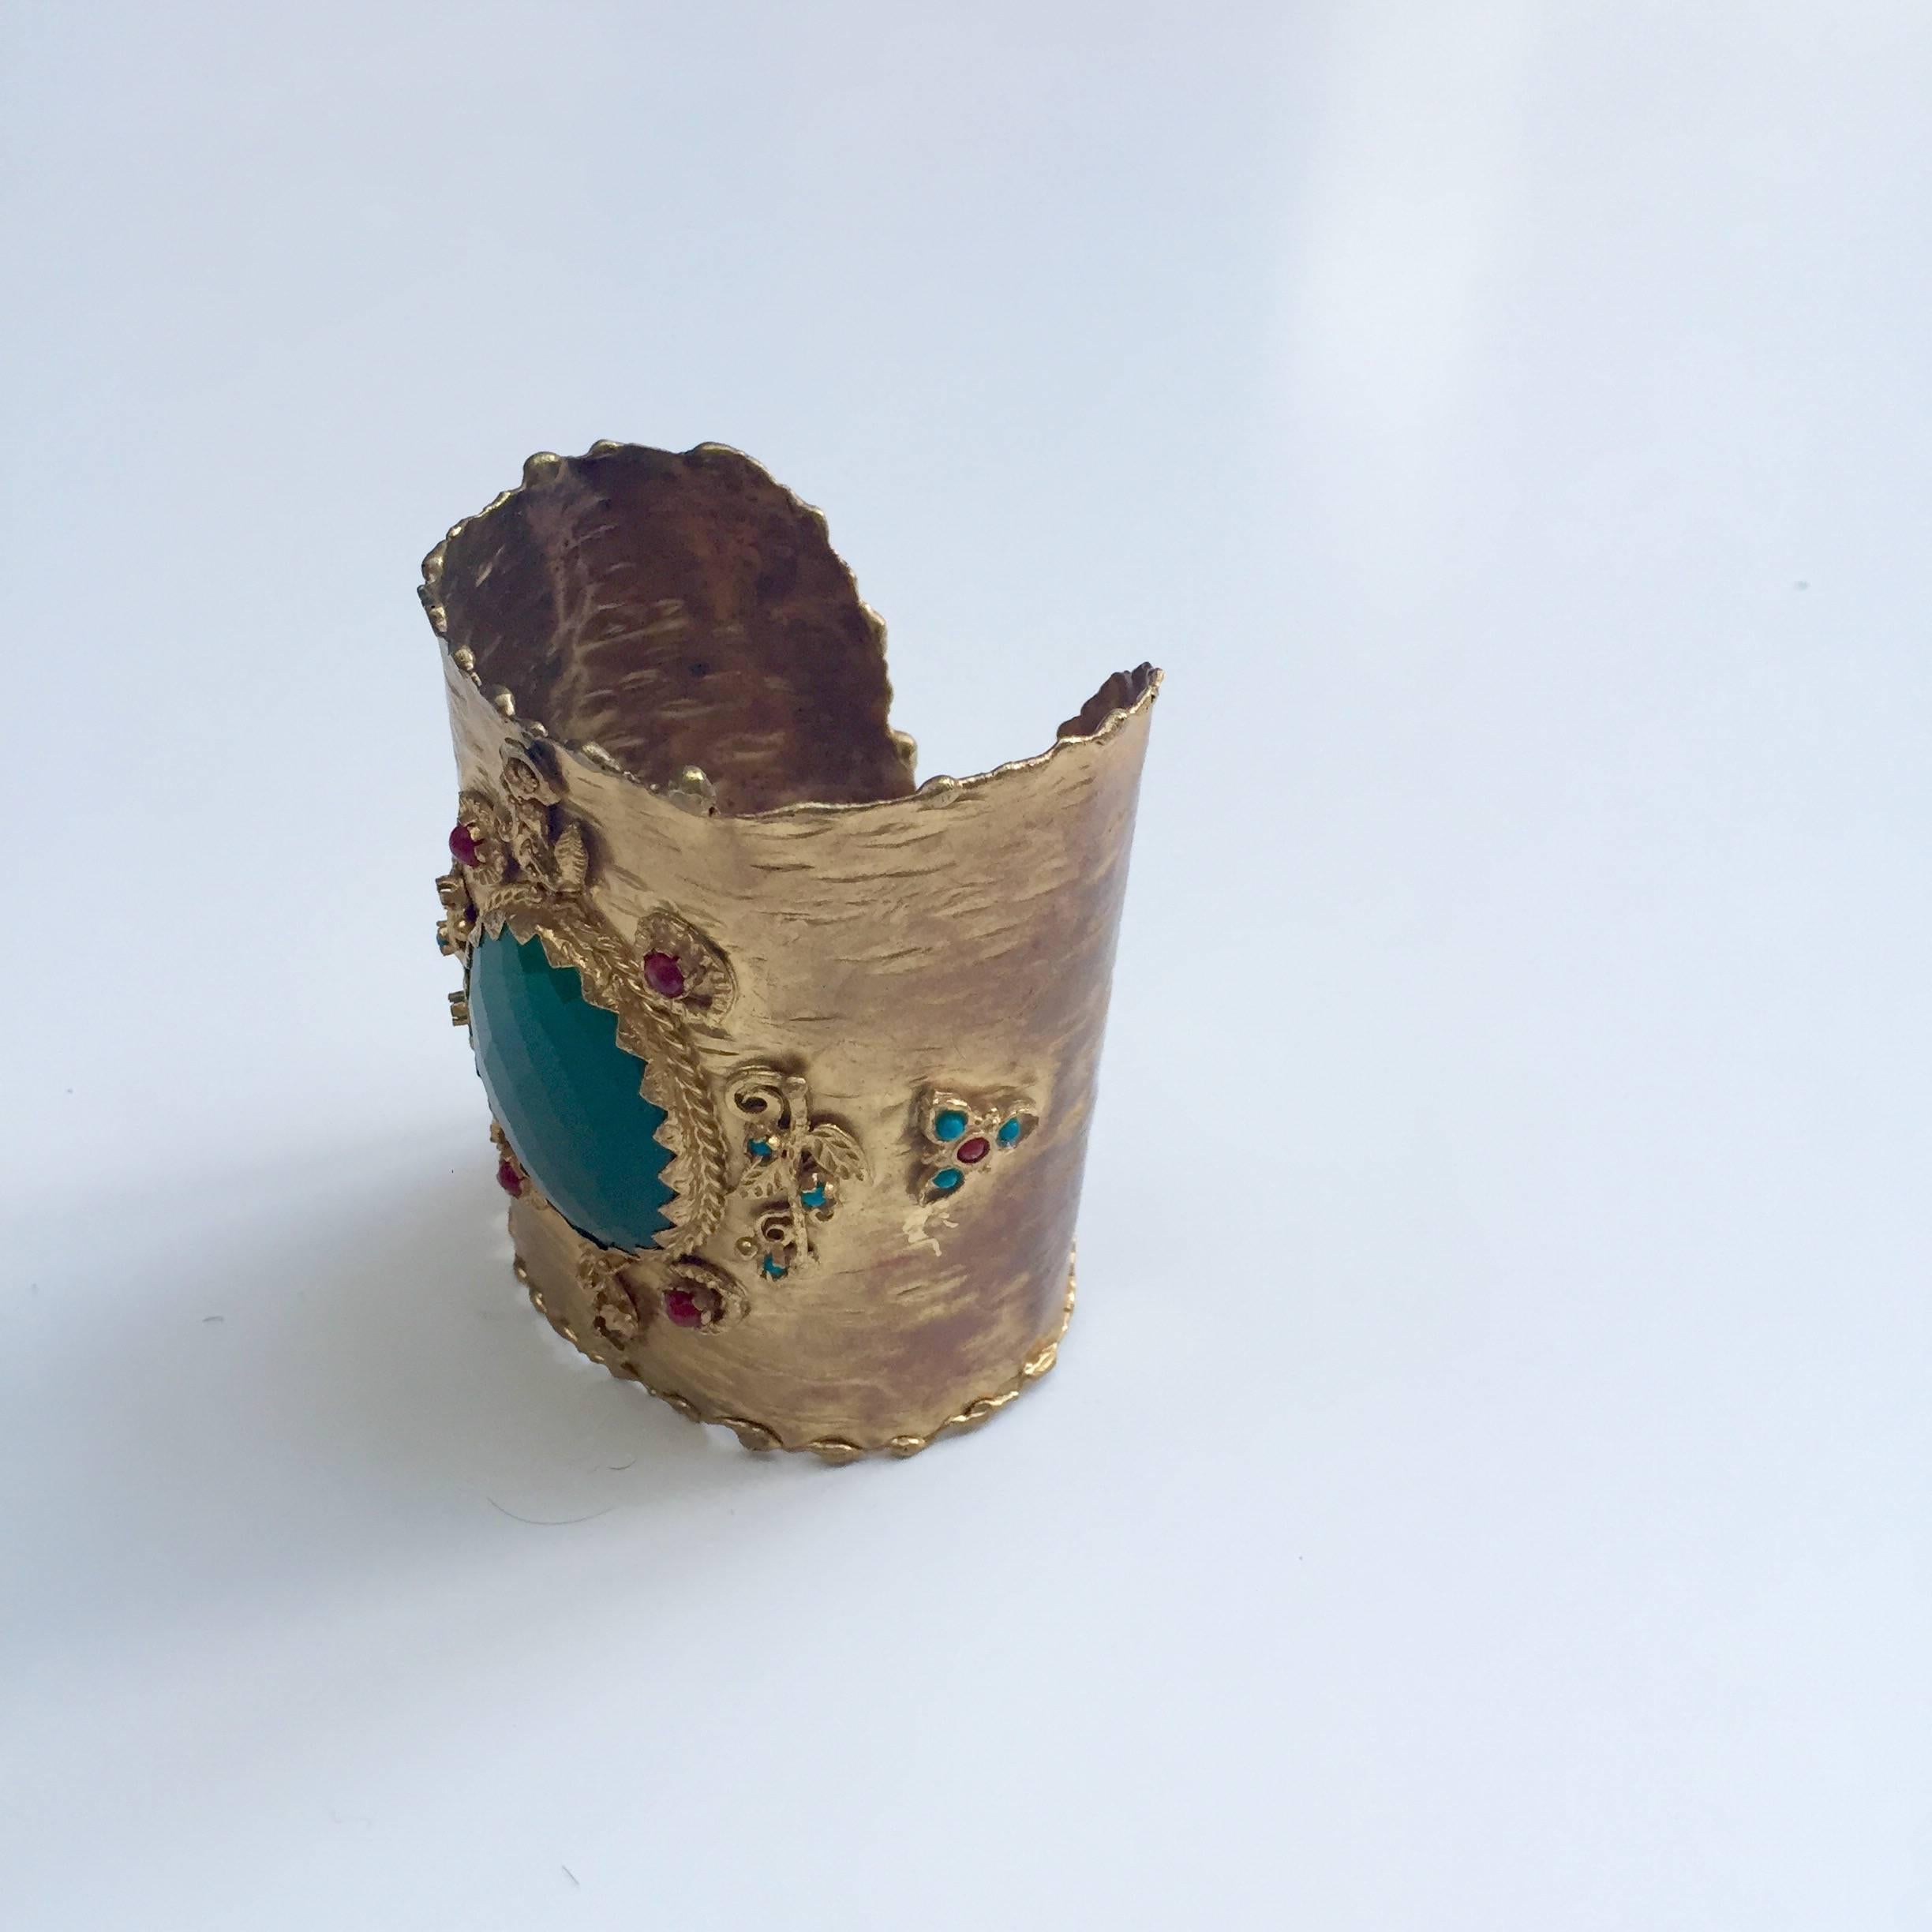 One of a kind gold-plated cuff with central green agate stone mad win Afghanistan by local craftsmen in the late 20th century.

The cuff is adjustable on the wrist.